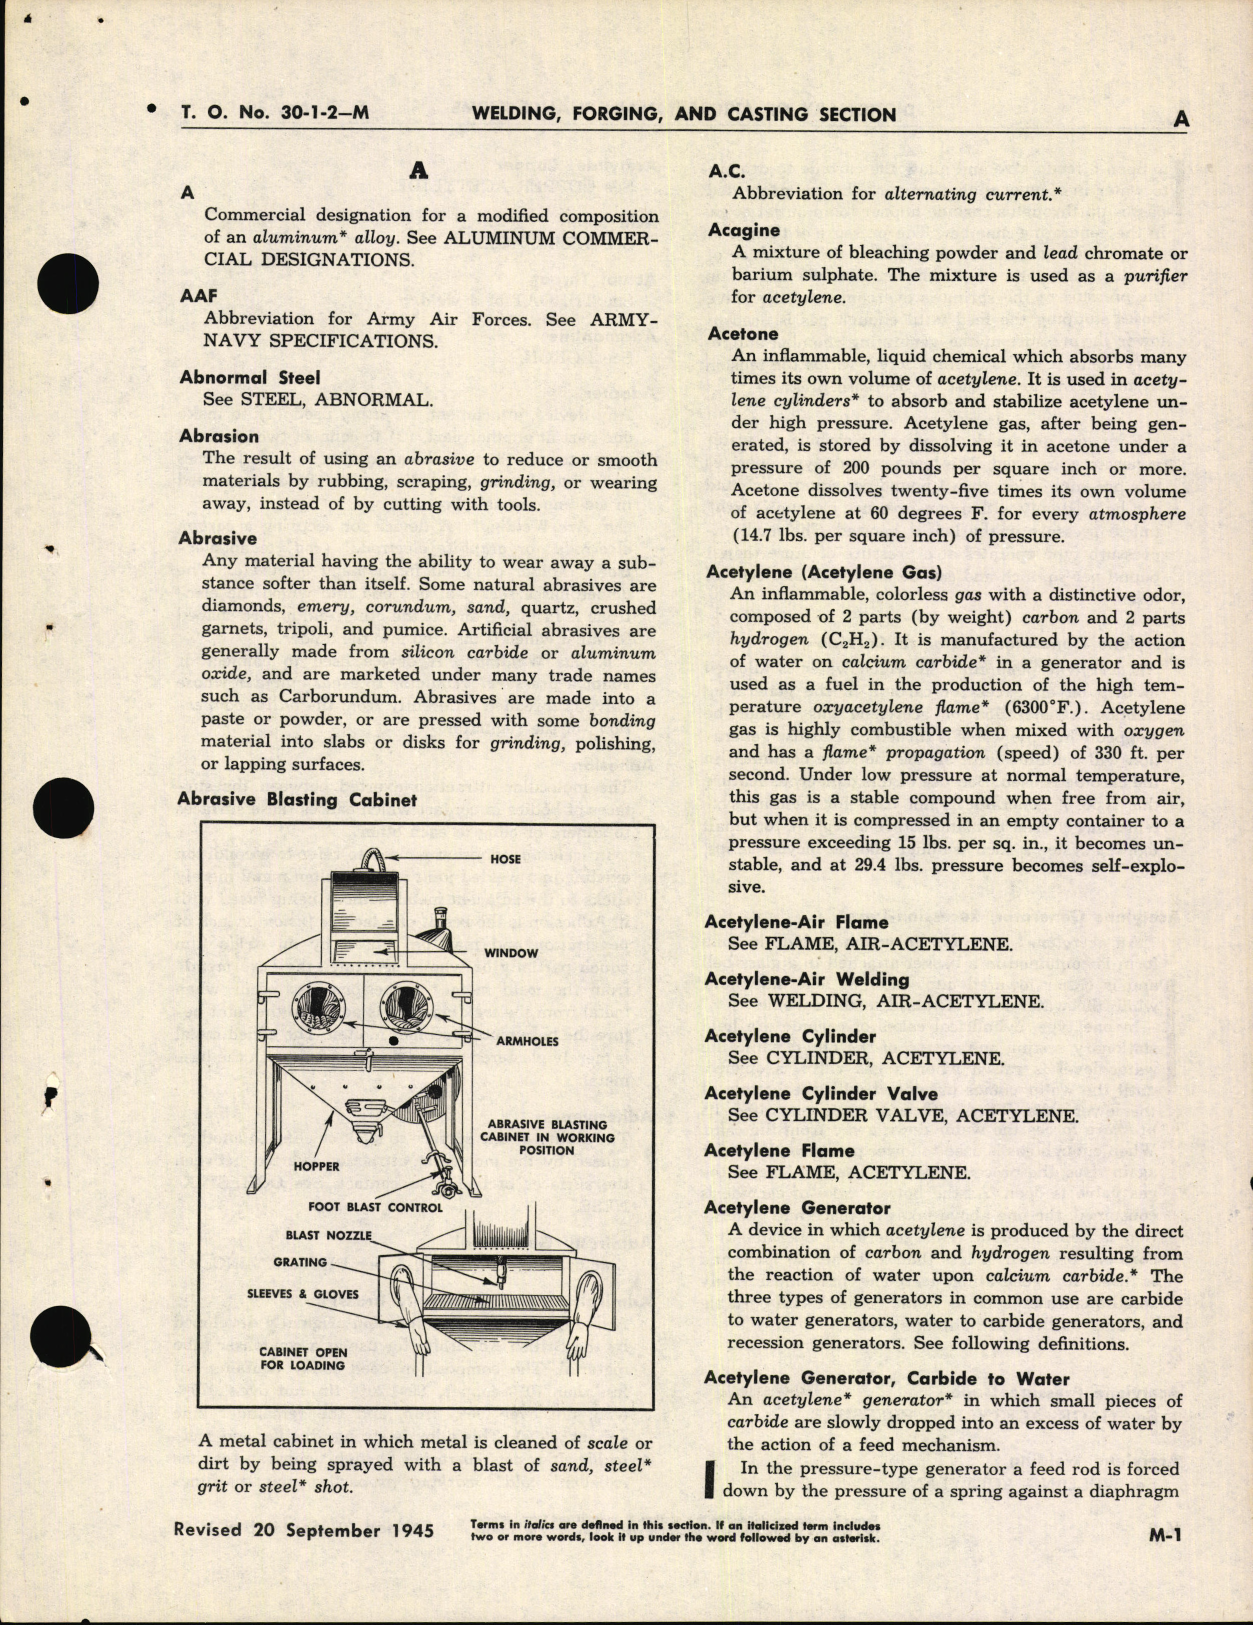 Sample page 5 from AirCorps Library document: Dictionary of Aircraft Maintenance terms; Section M Welding, Forging and Casting Section